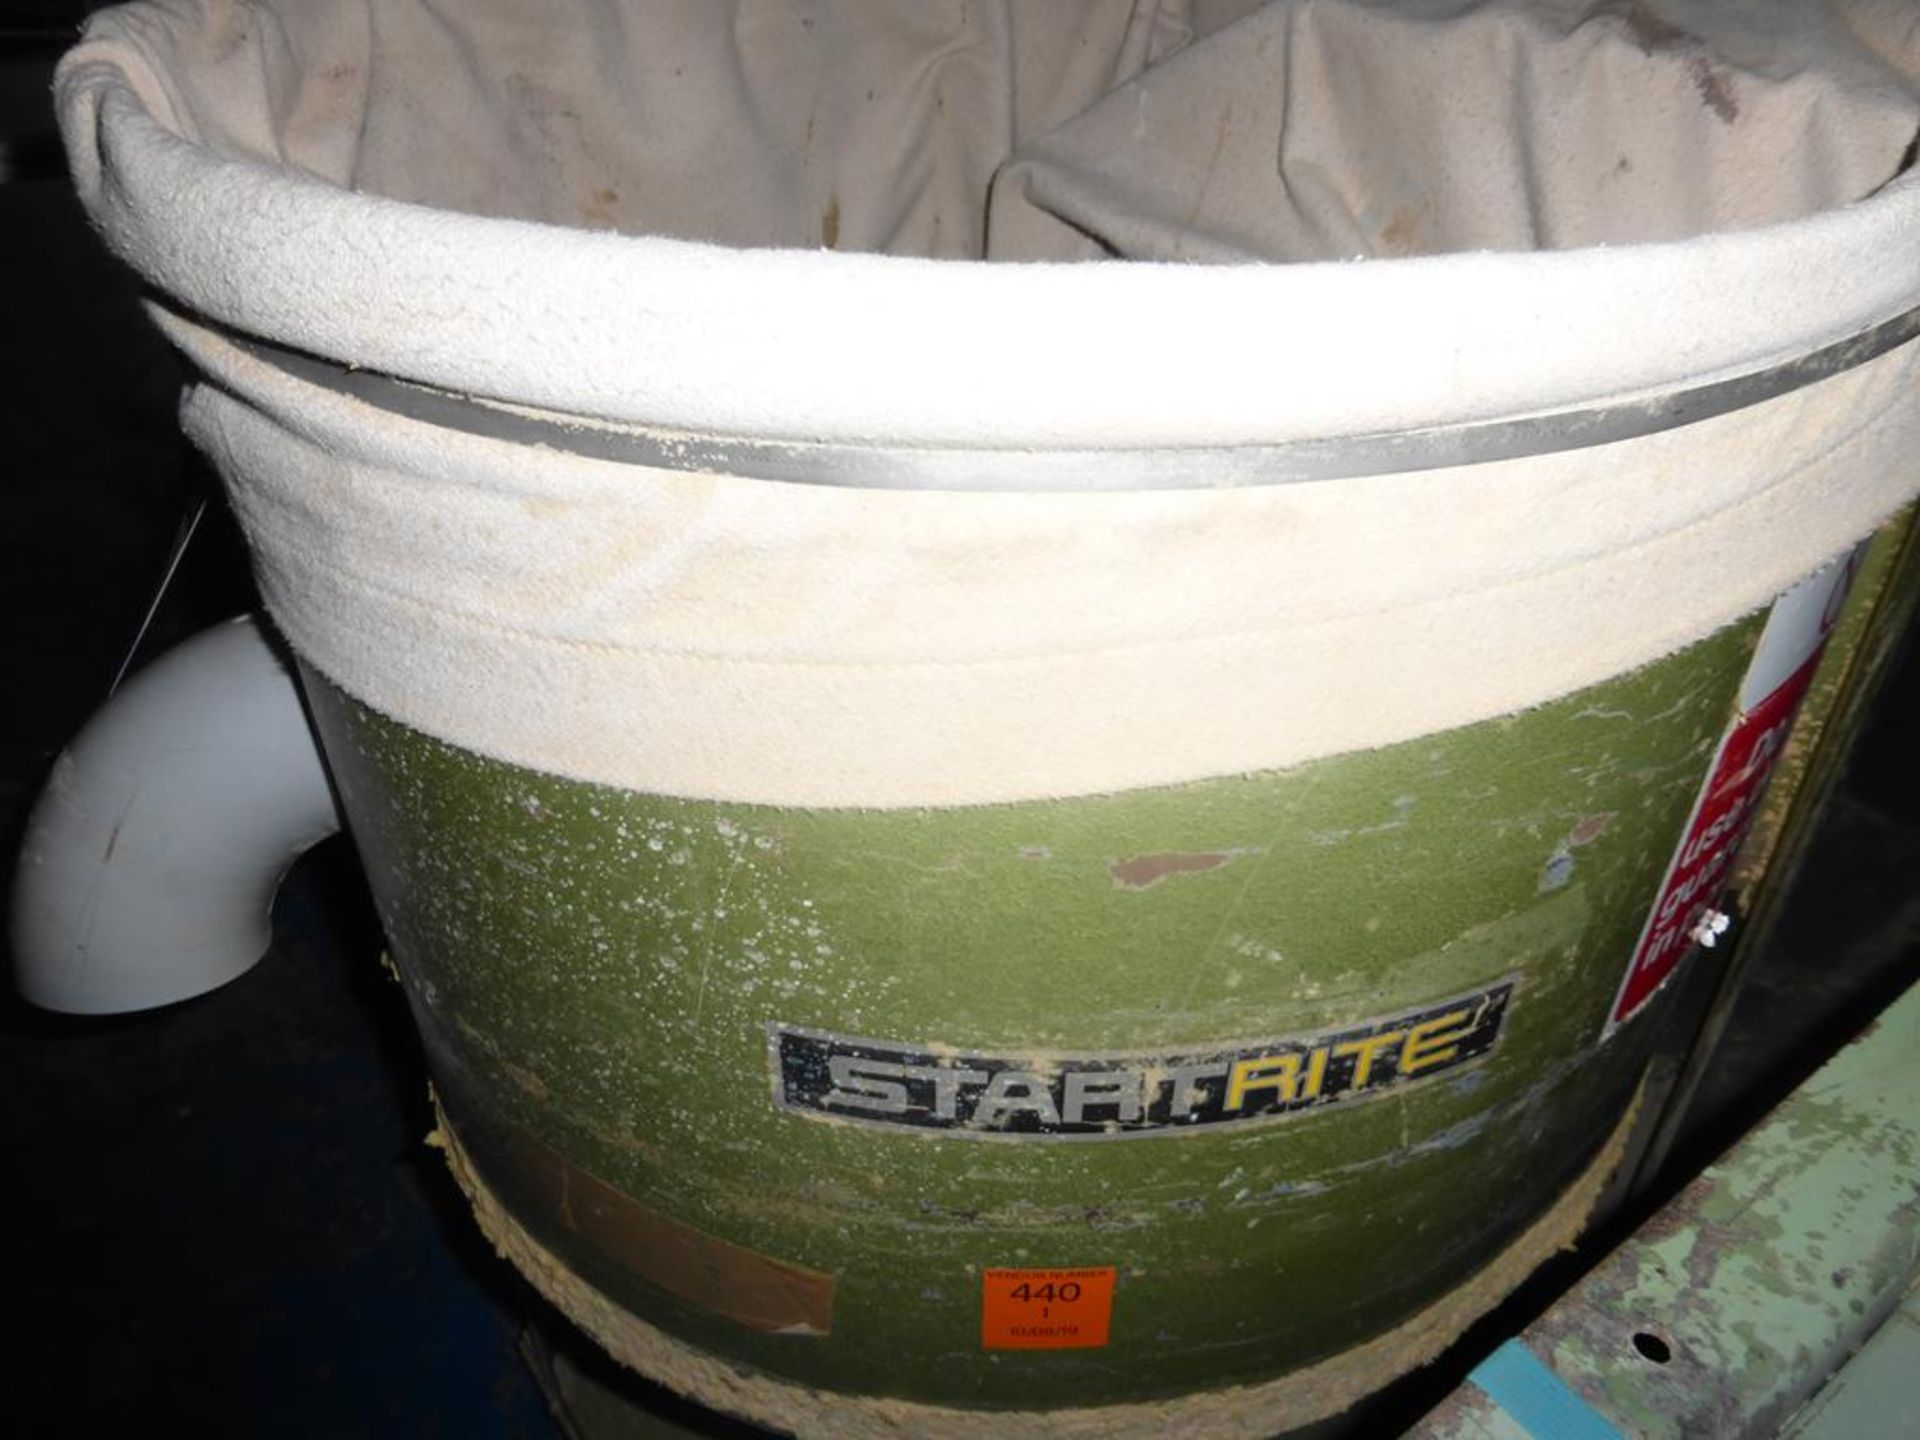 Startrite Cyclair 3 Phase Single Bag Dust Extractor - Image 2 of 2